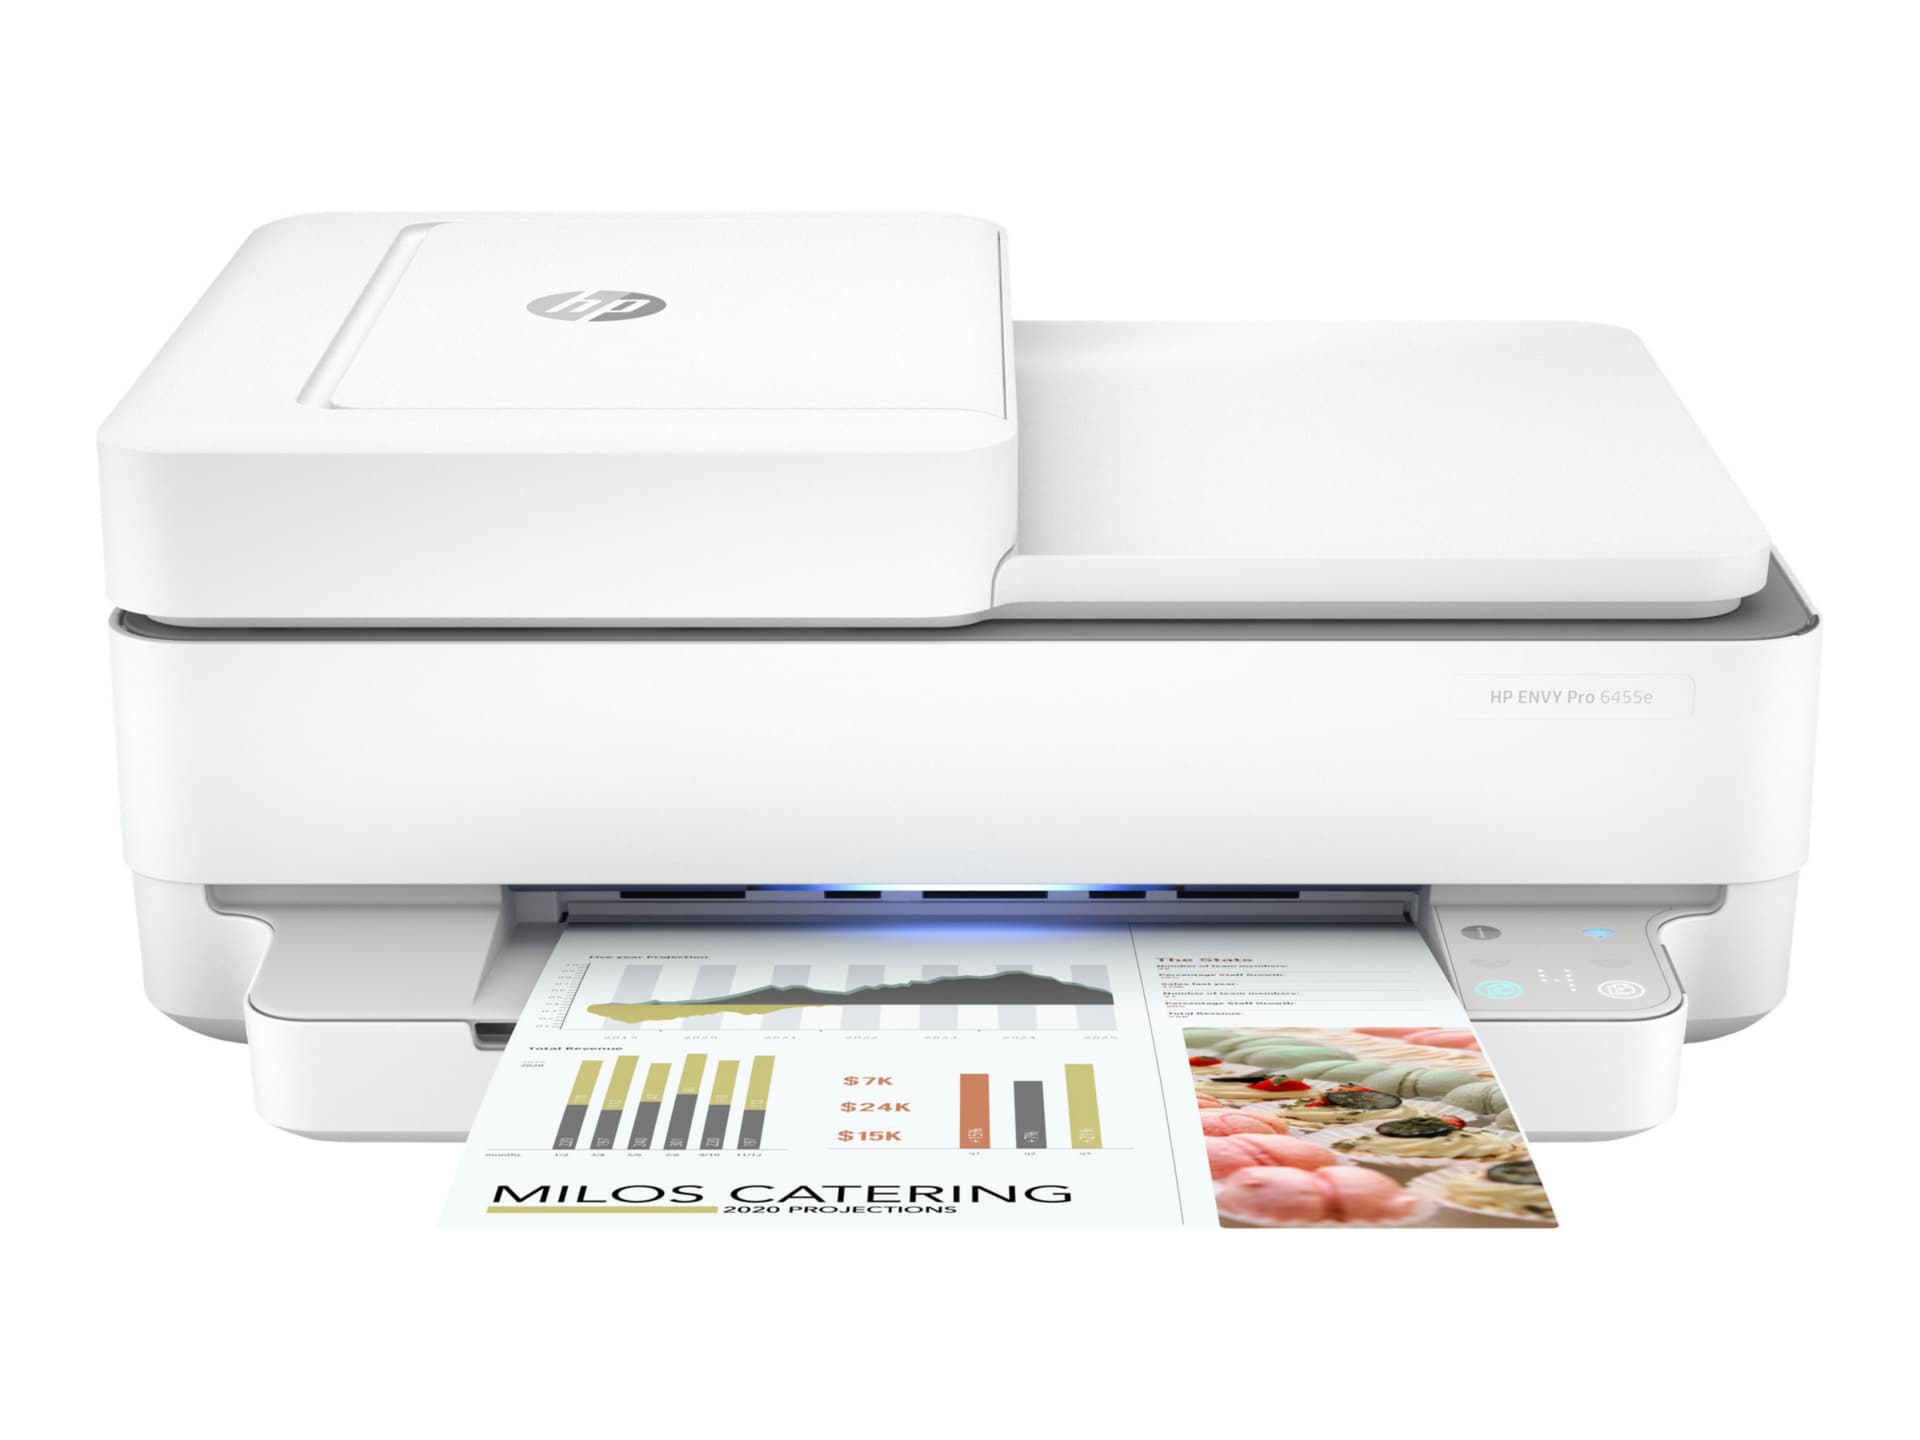 HP ENVY Pro 6455e All-in-One - multifunction printer - color - HP Ink eligible - 223R1A#B1H All-in-One Printers - CDW.com